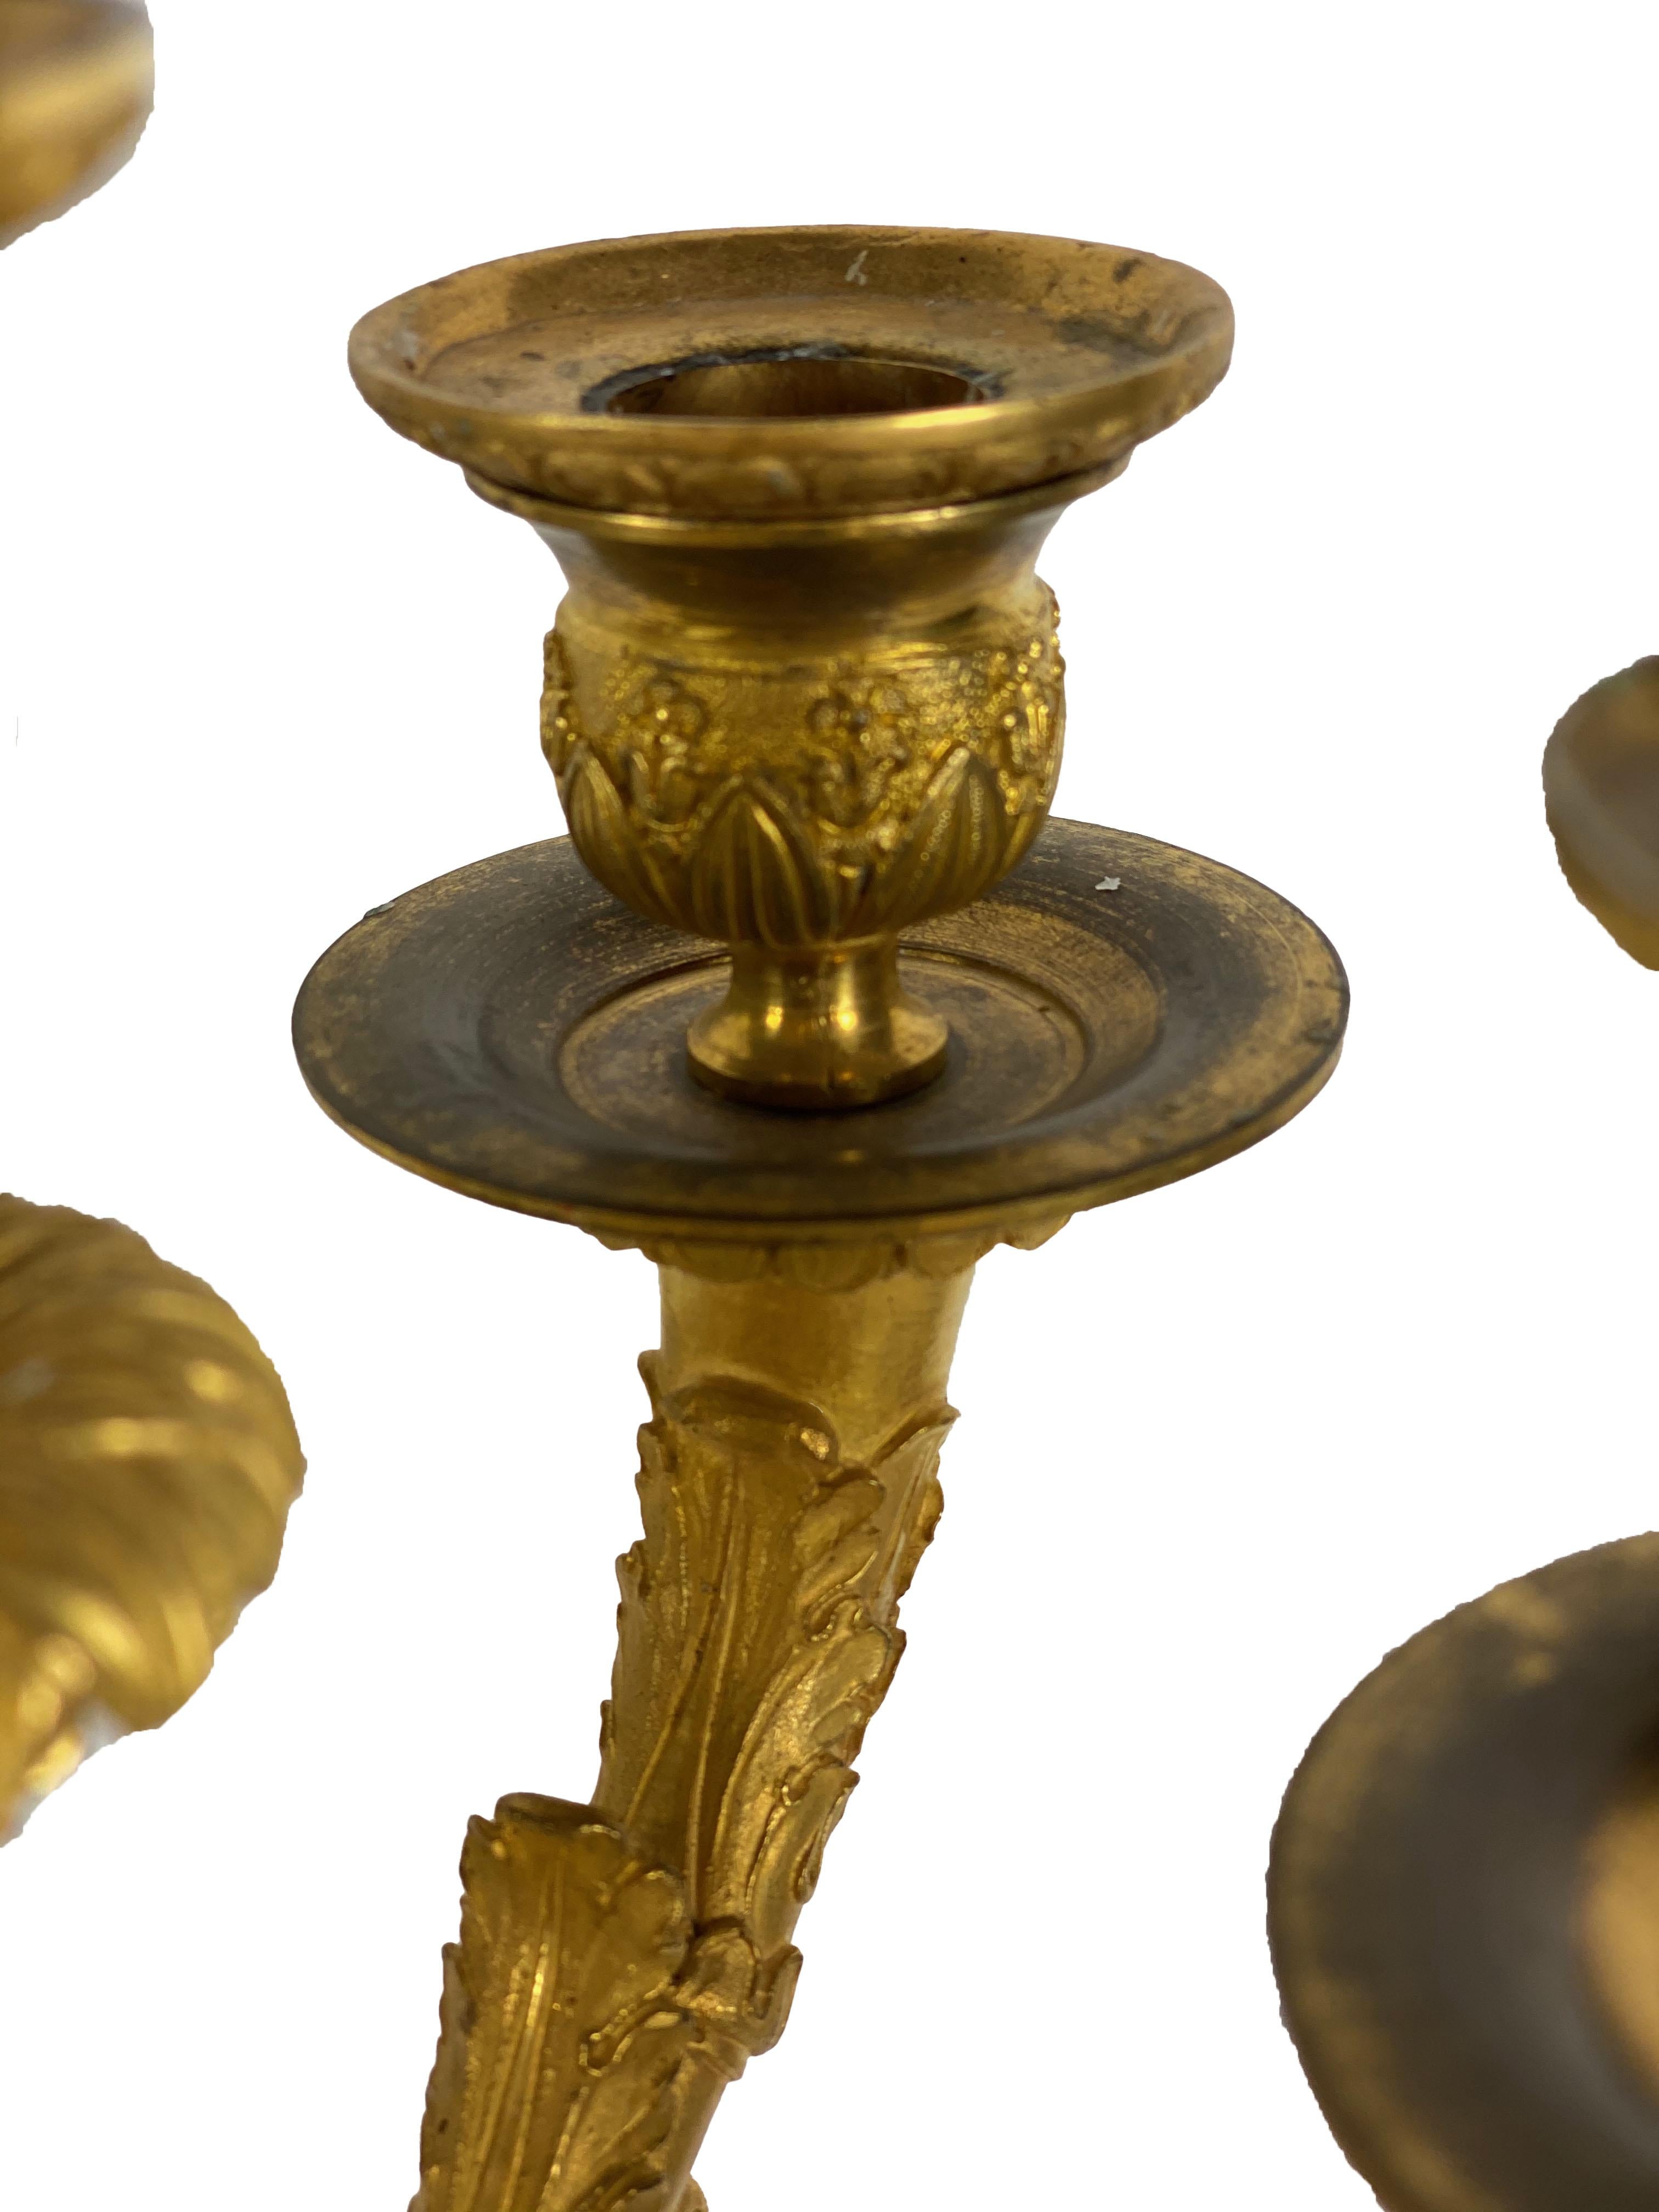 1870 French Empire Style Bronze Dore Candleholders, a Pair For Sale 2